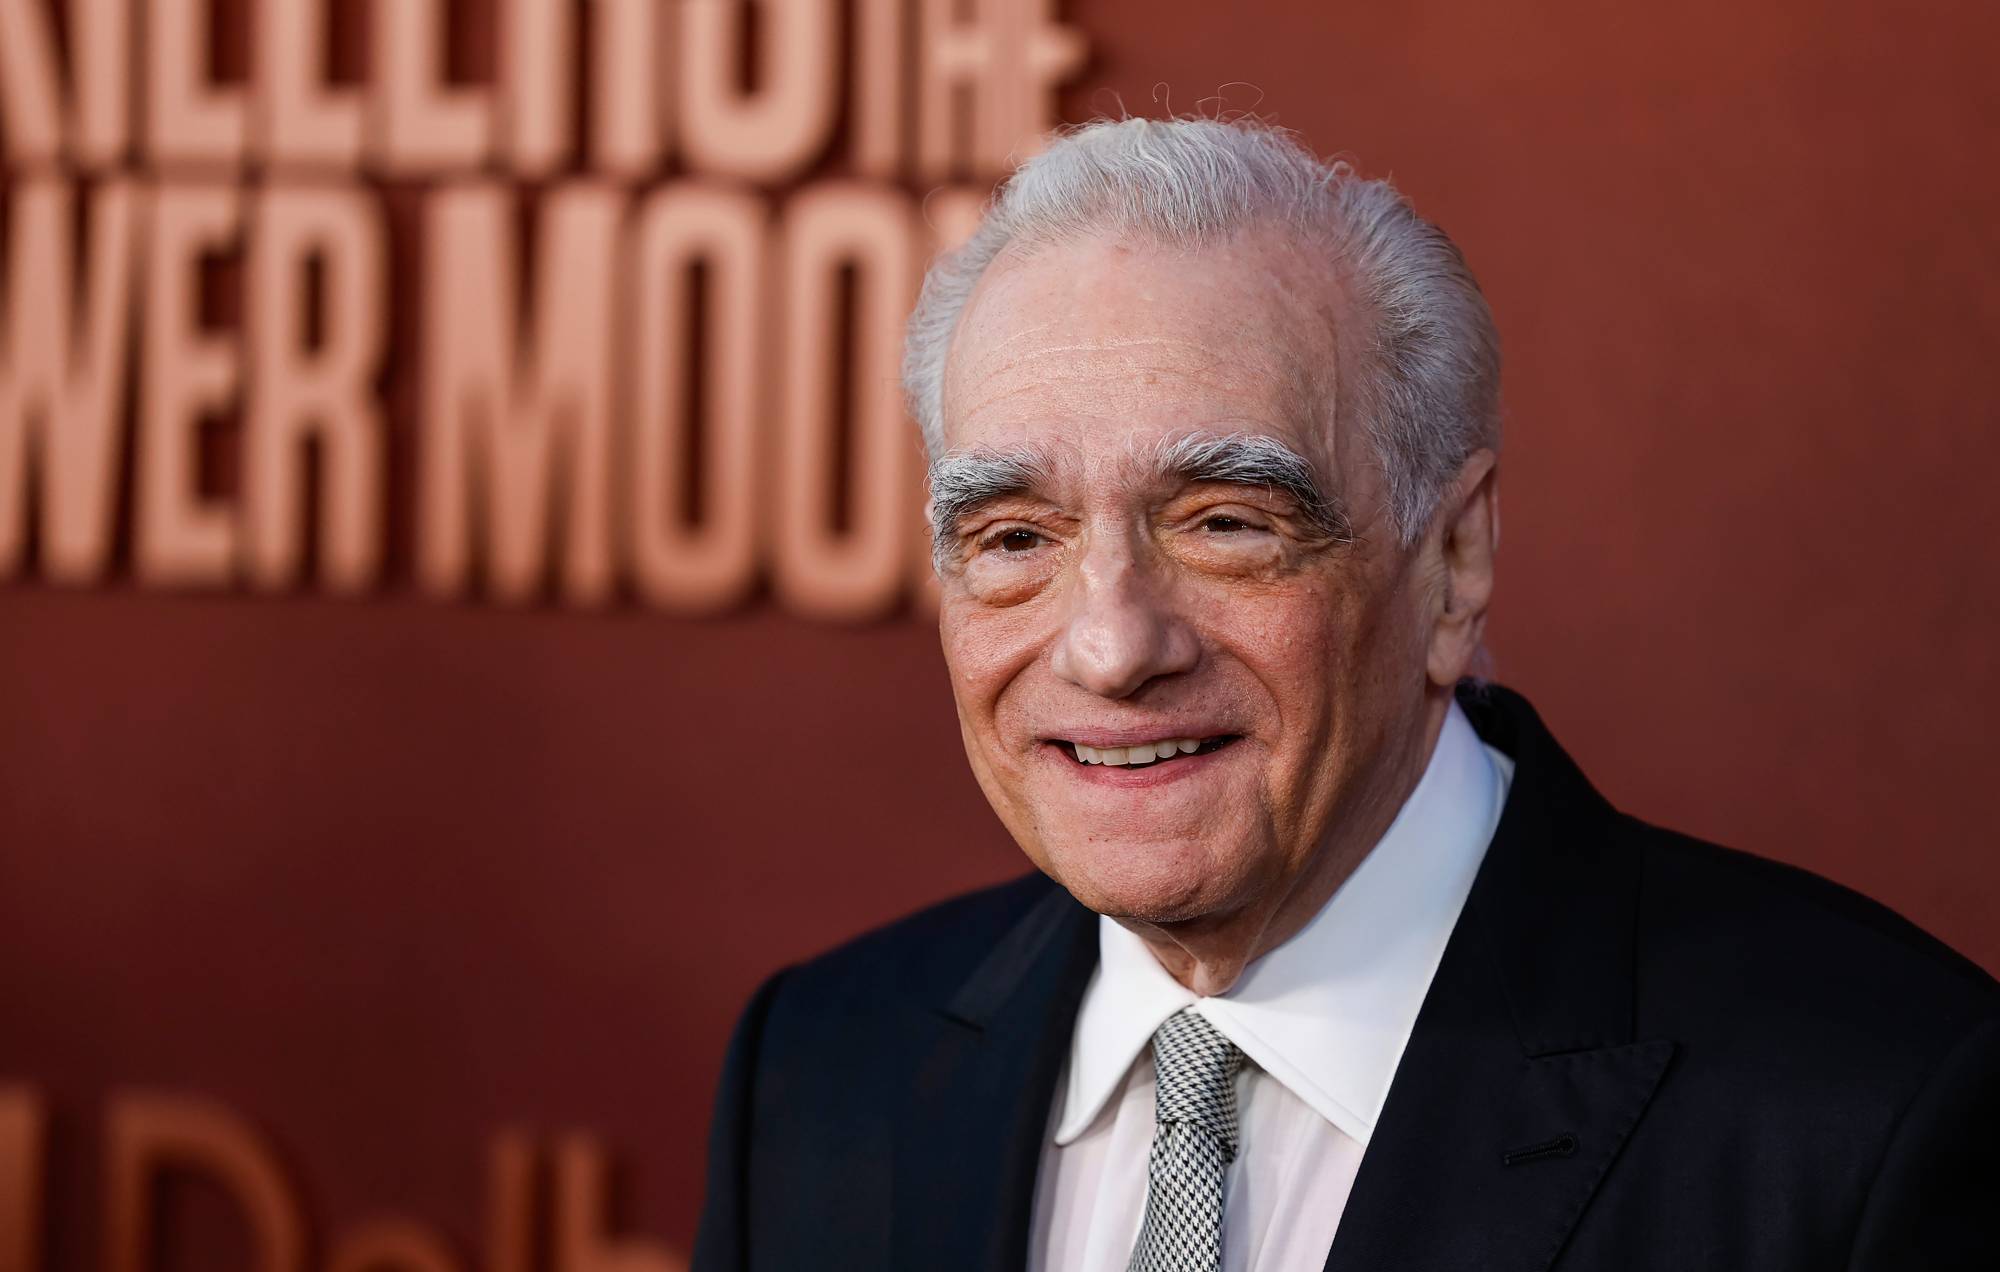 Martin Scorsese wants you to watch all of these films